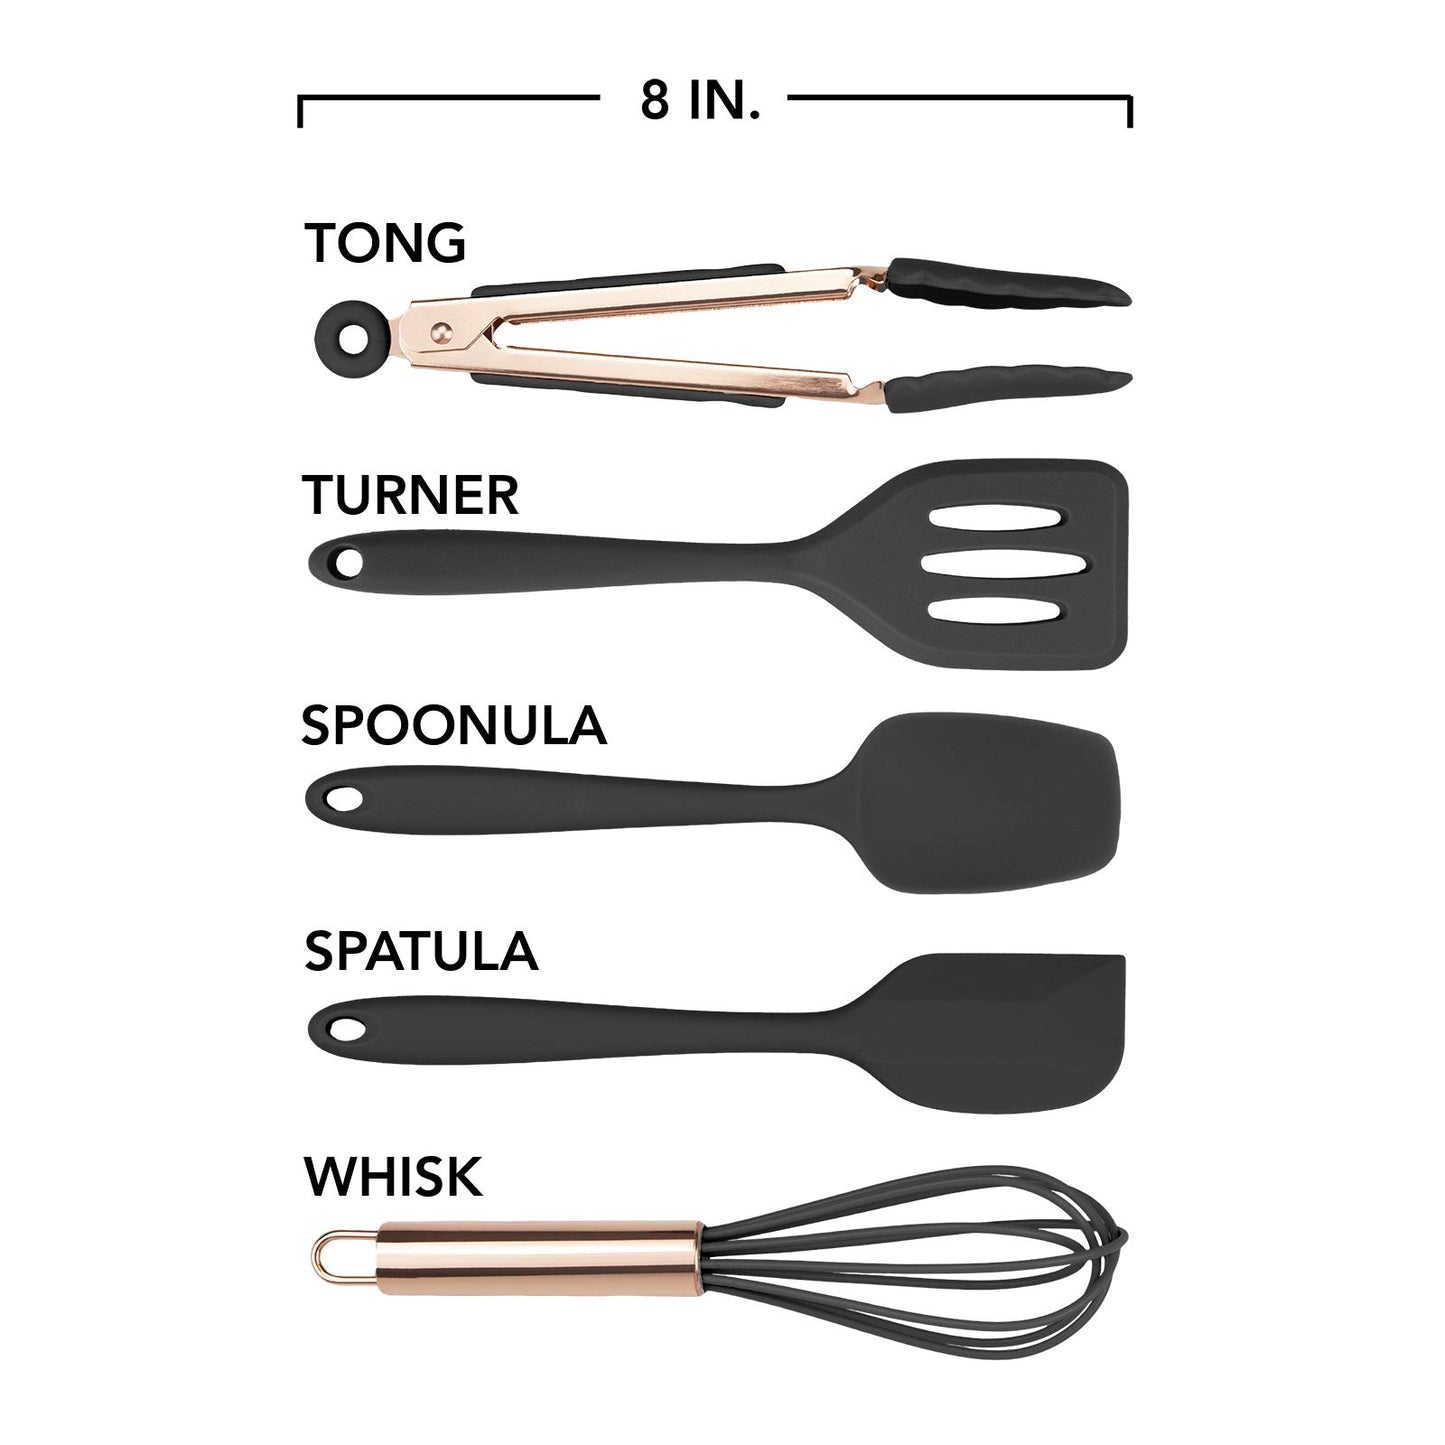 Cook With Color Set of Five Gray and Rose Gold Silicone Mini Kitchen Utensil Set